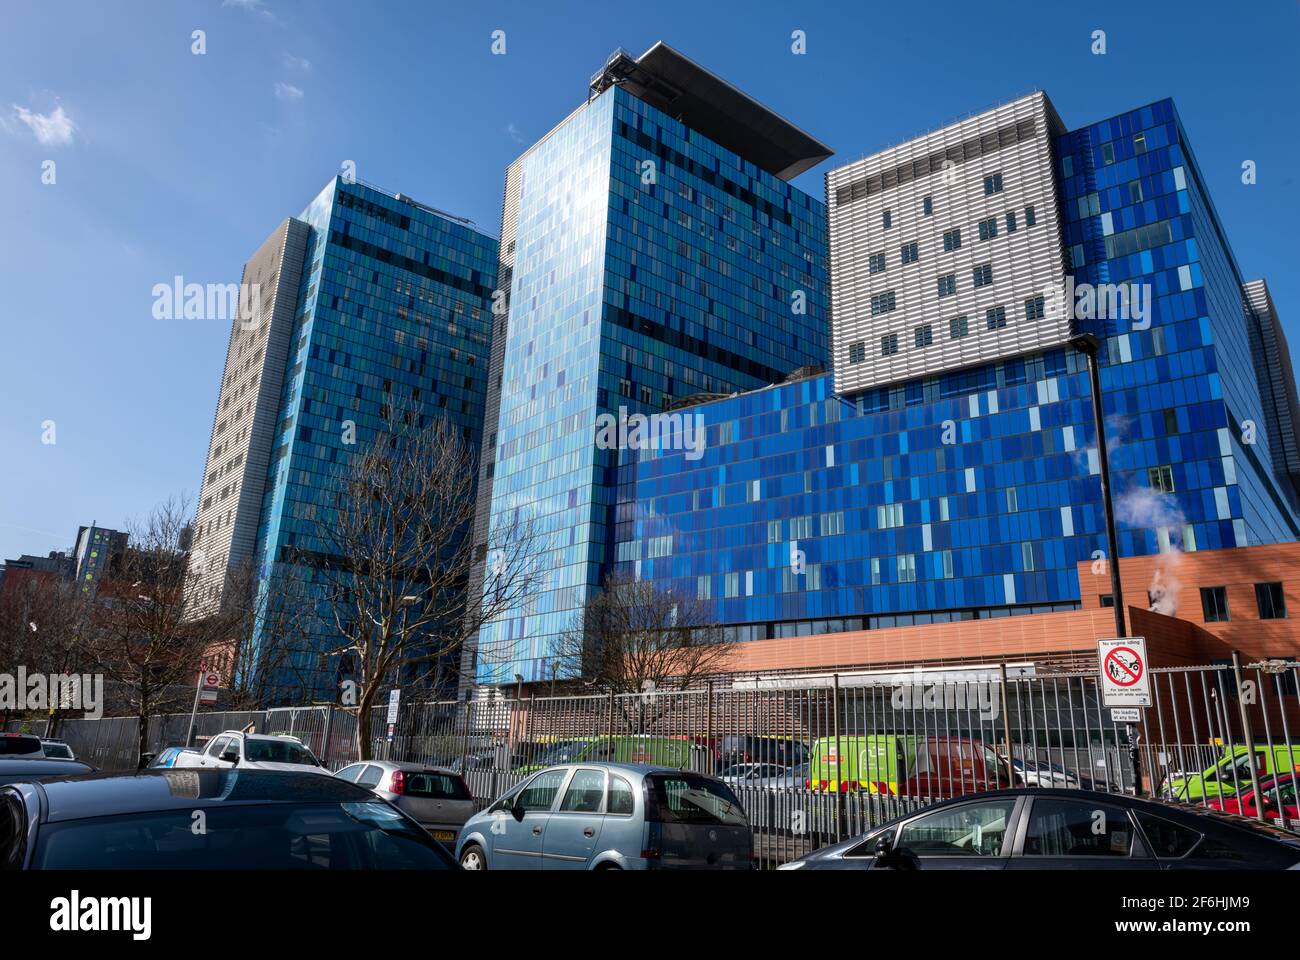 A street view of The Royal London Hospital. A NHS general hospital and part of Barts Health NHS Trust with a Air Ambulance rooftop helipad. Stock Photo